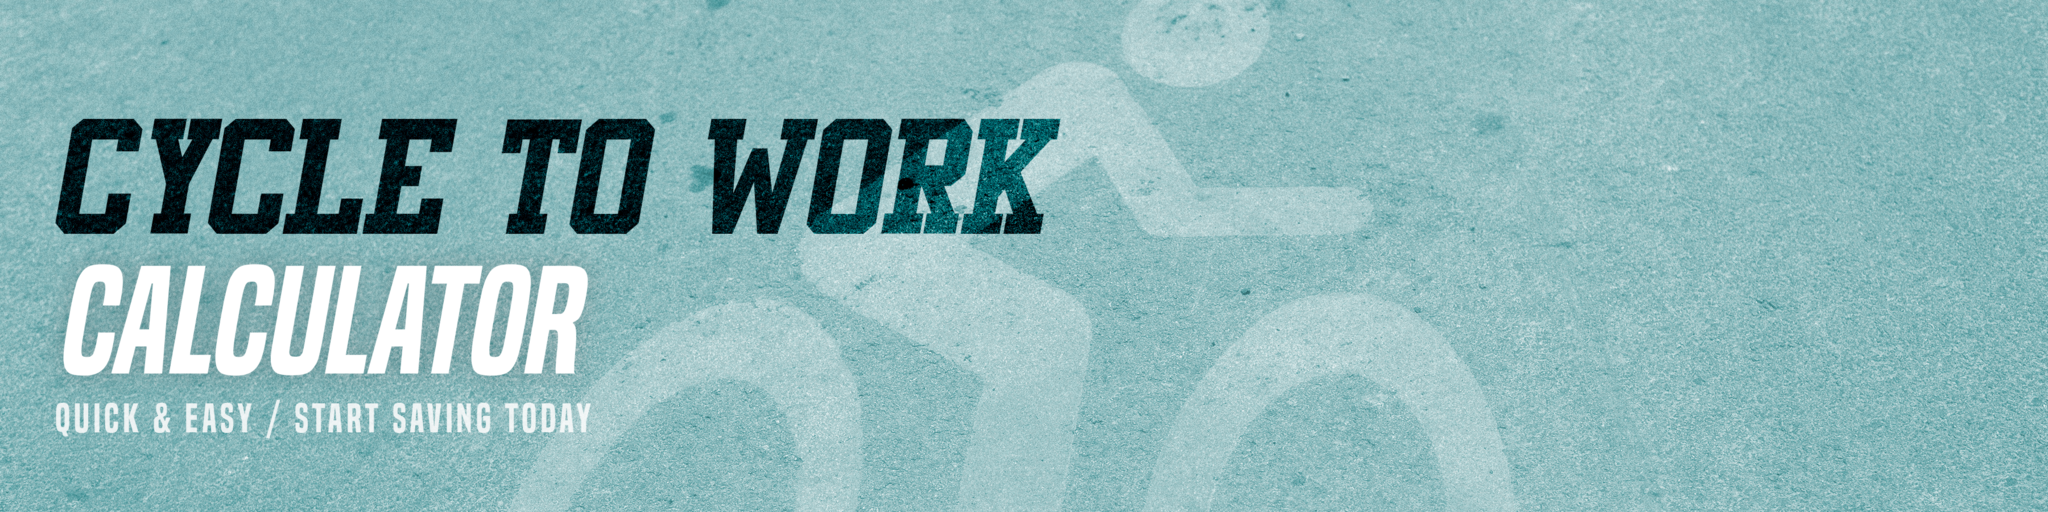 Cycle to Work Calculator banner